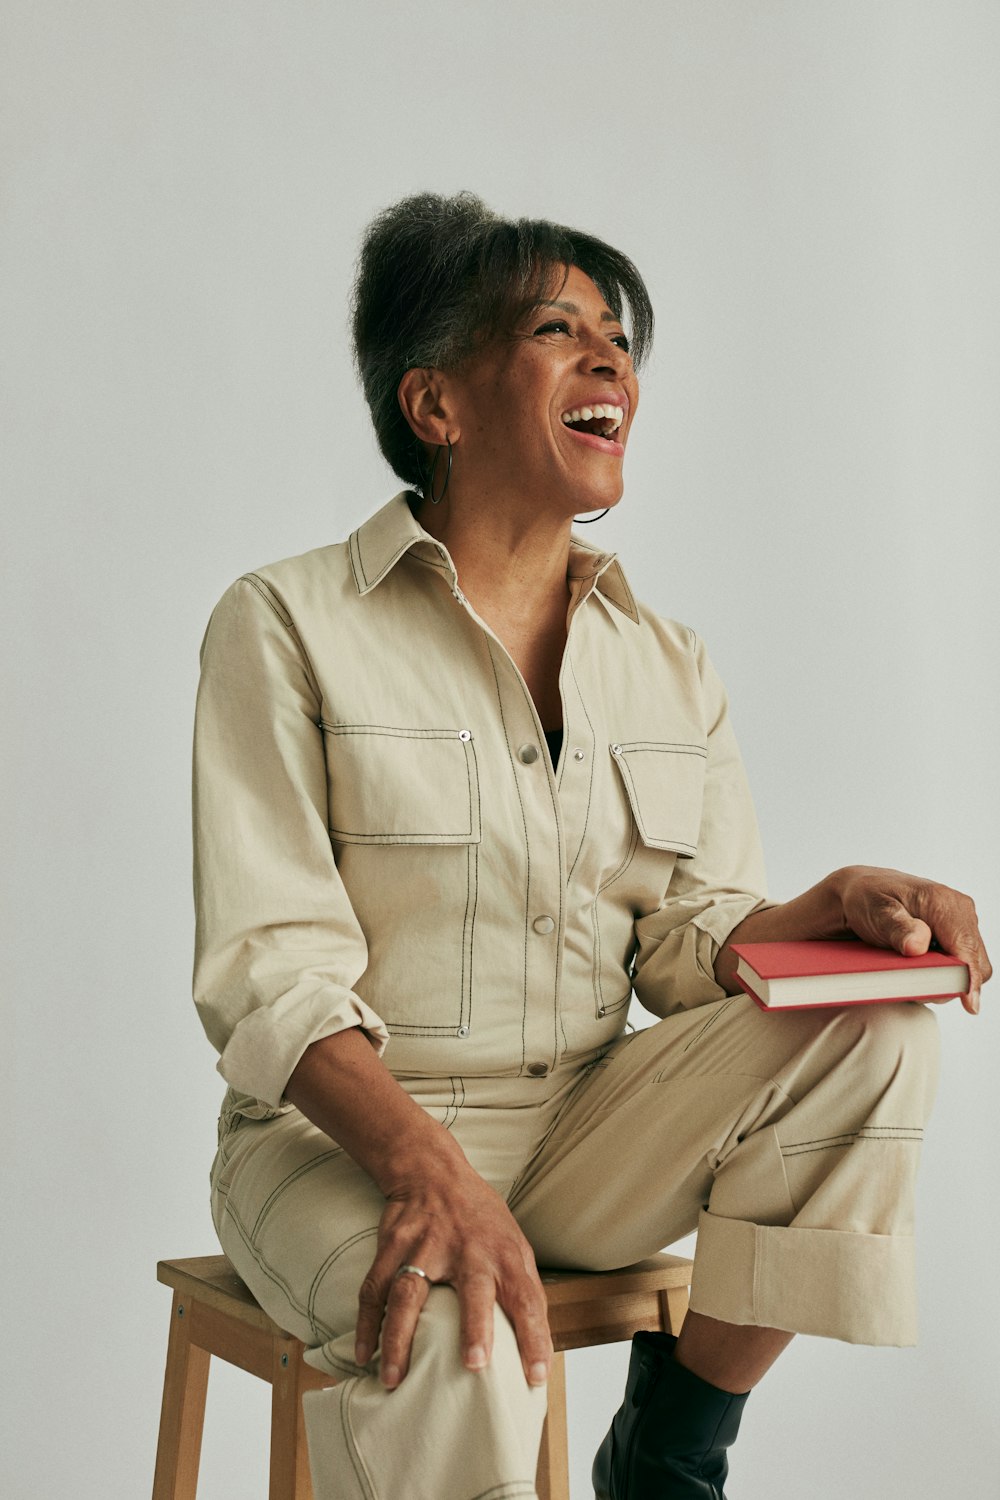 a woman sitting on a stool laughing and holding a book